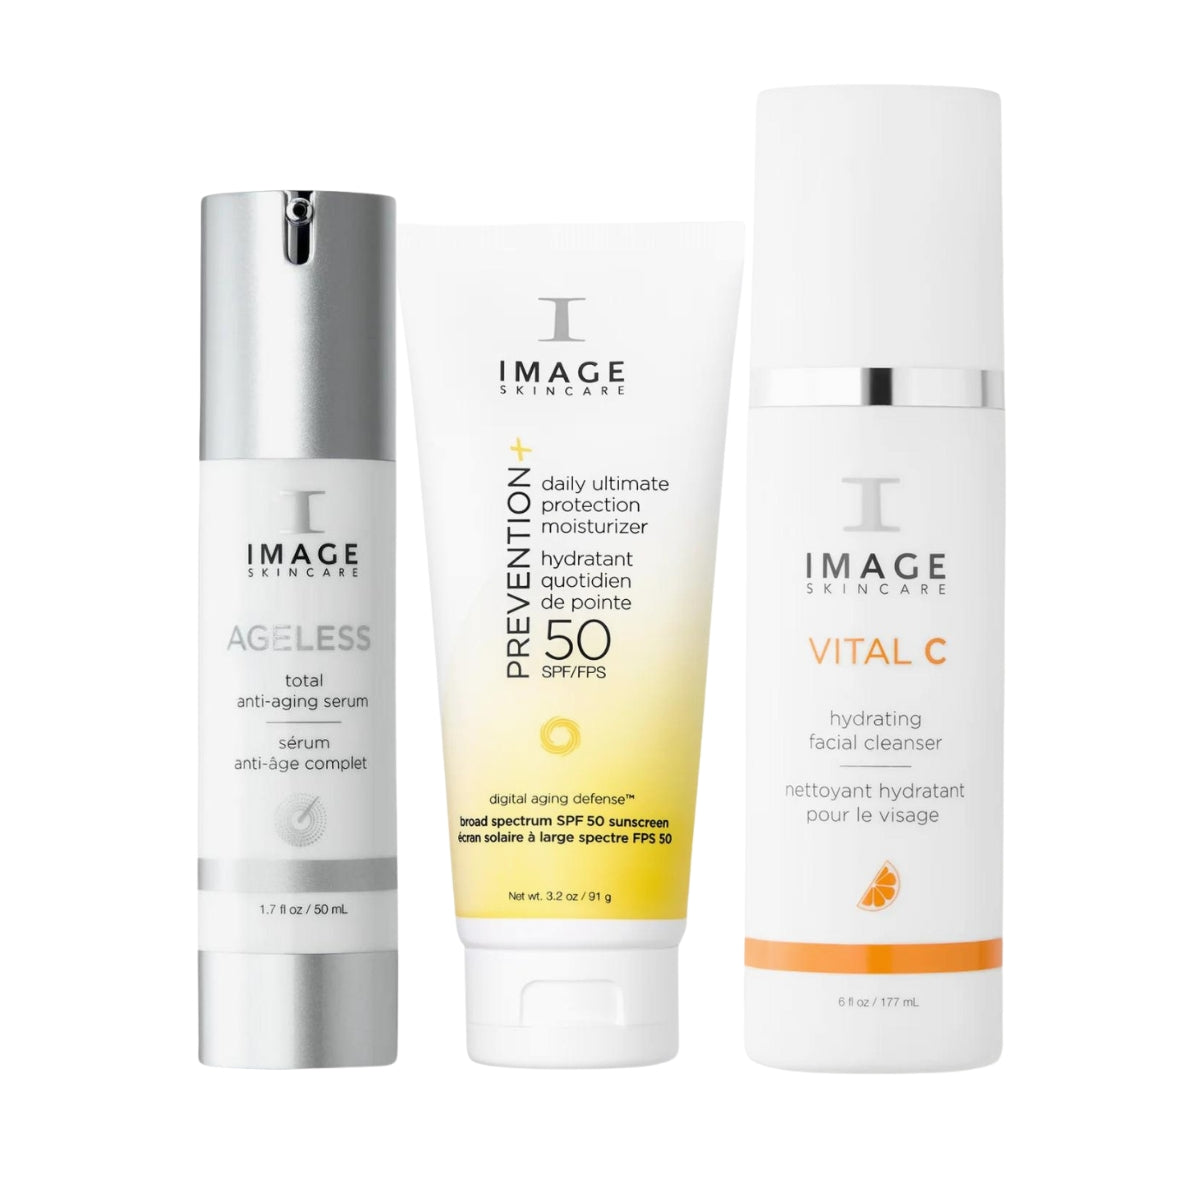 IMAGE Skincare Smooth & Firm